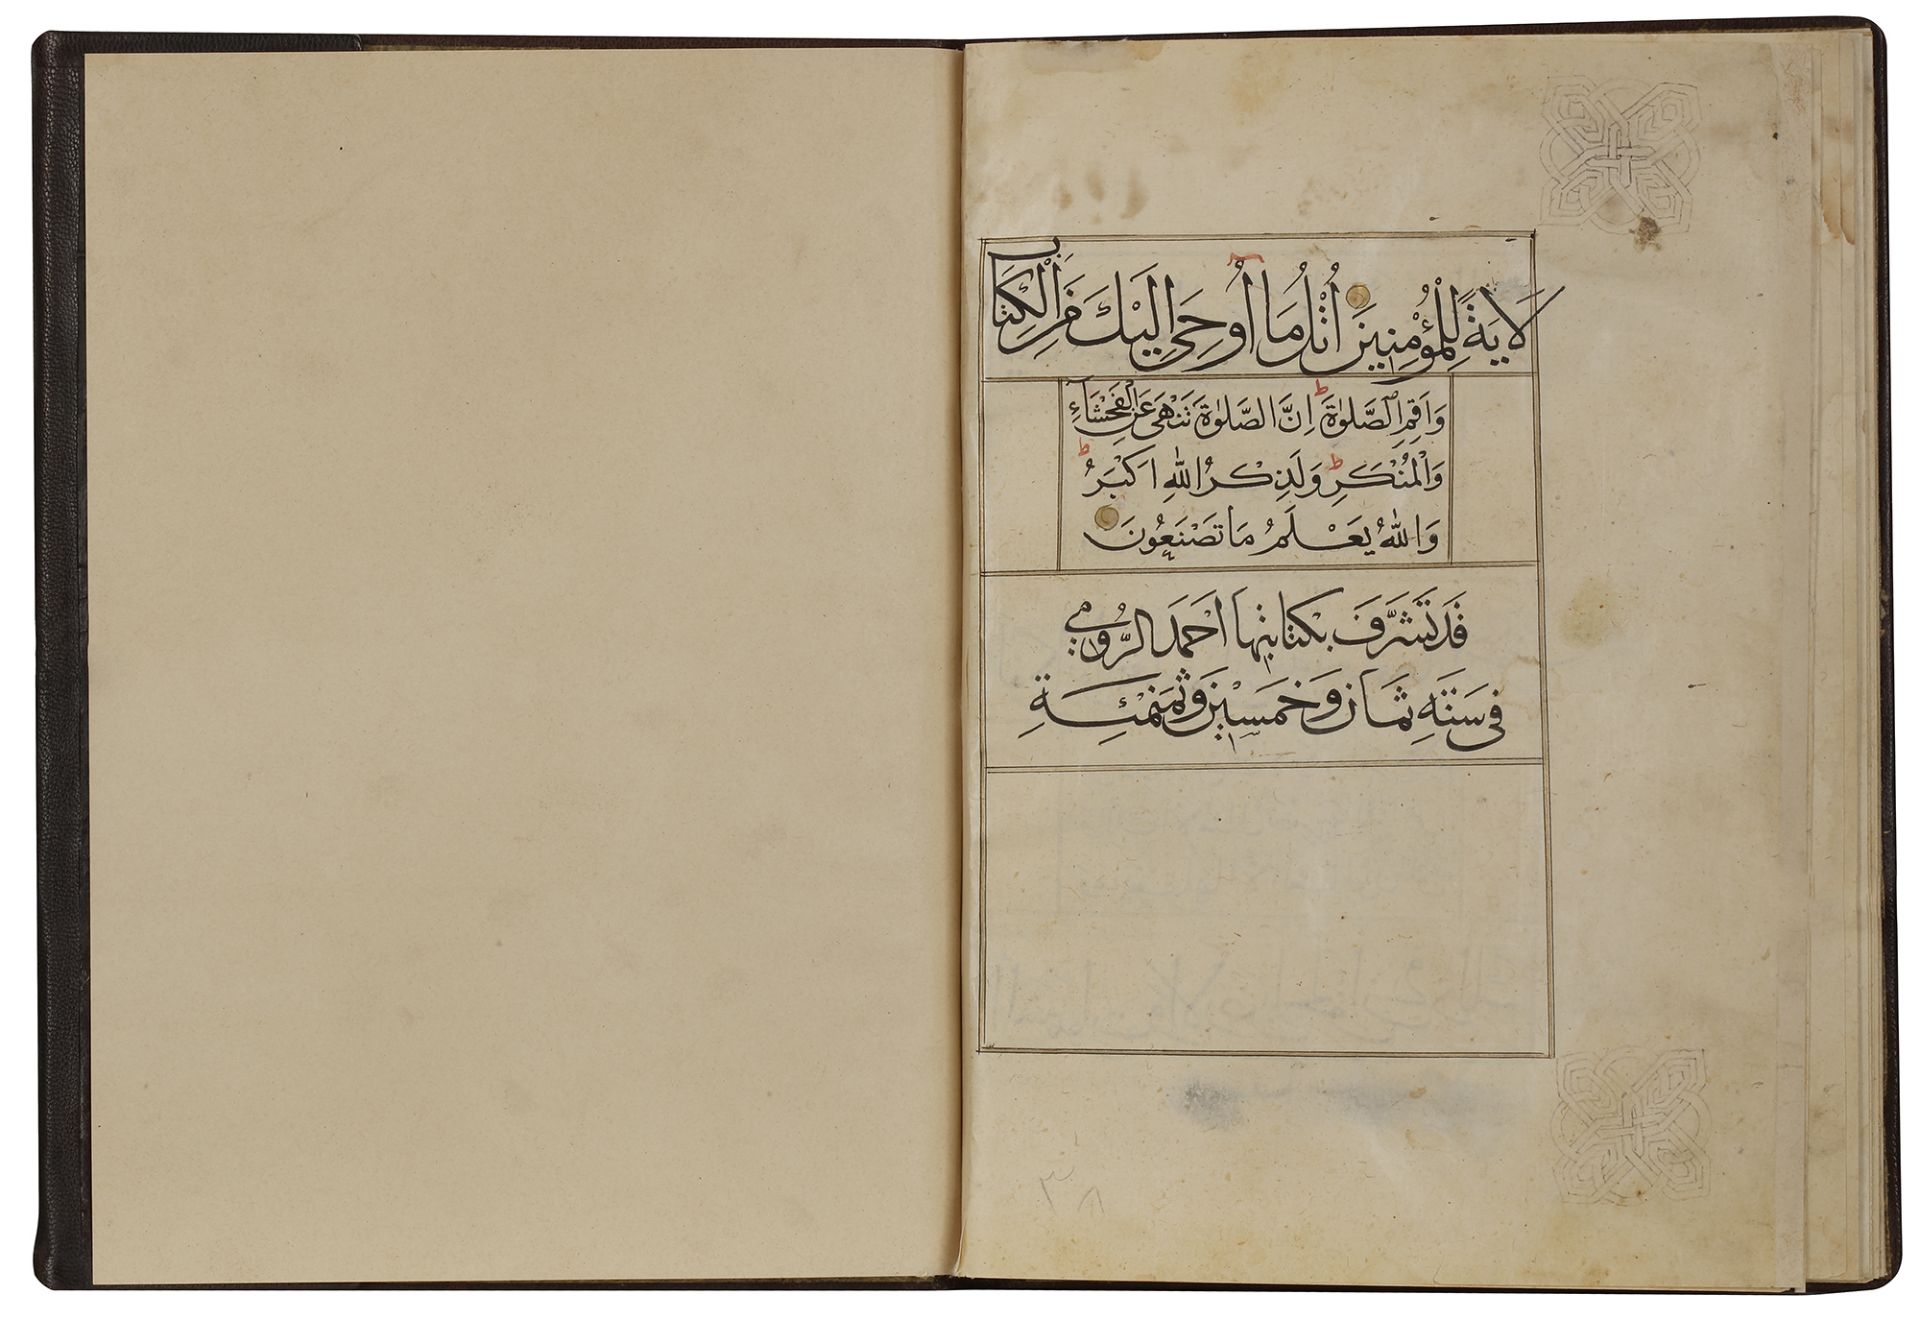 A LATE TIMURID QURAN JUZ, BY AHMED AL-RUMI IN 858 AH/1454 AD - Image 4 of 4